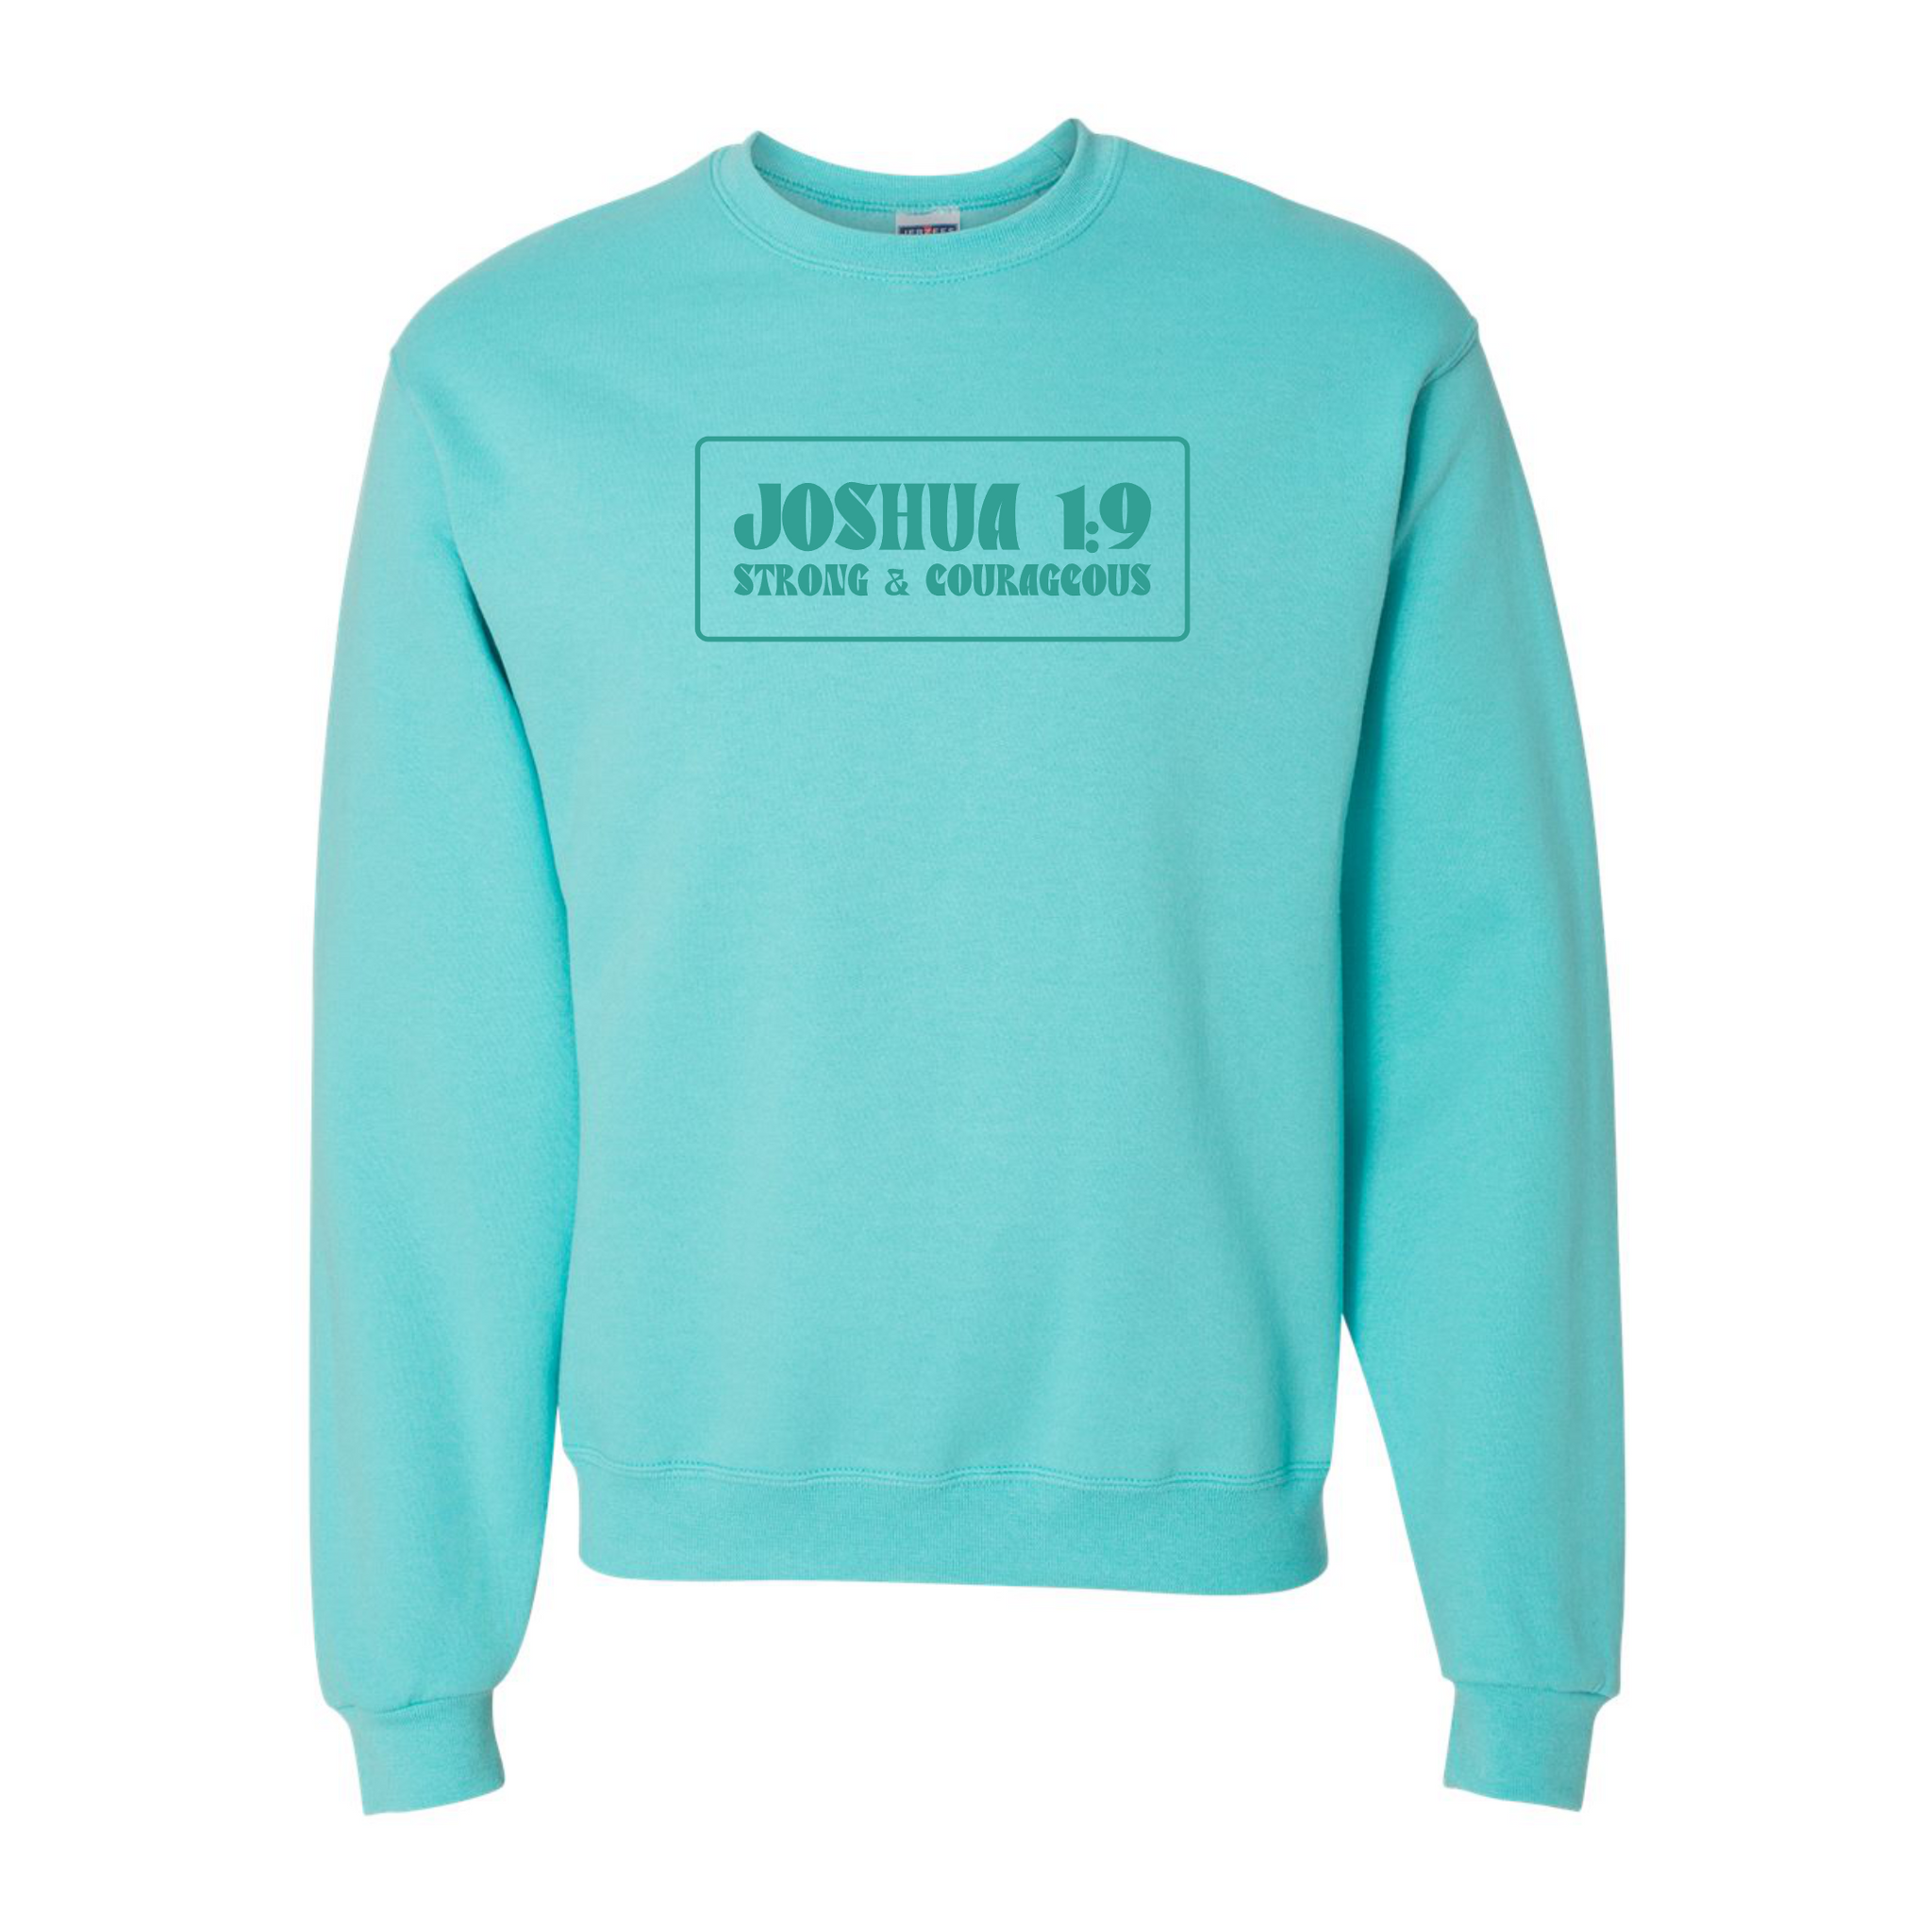 Joshua 1:9 Strong and Courageous Verse - Turquoise Sweatshirt - Adult & Women's Gym Top - S002